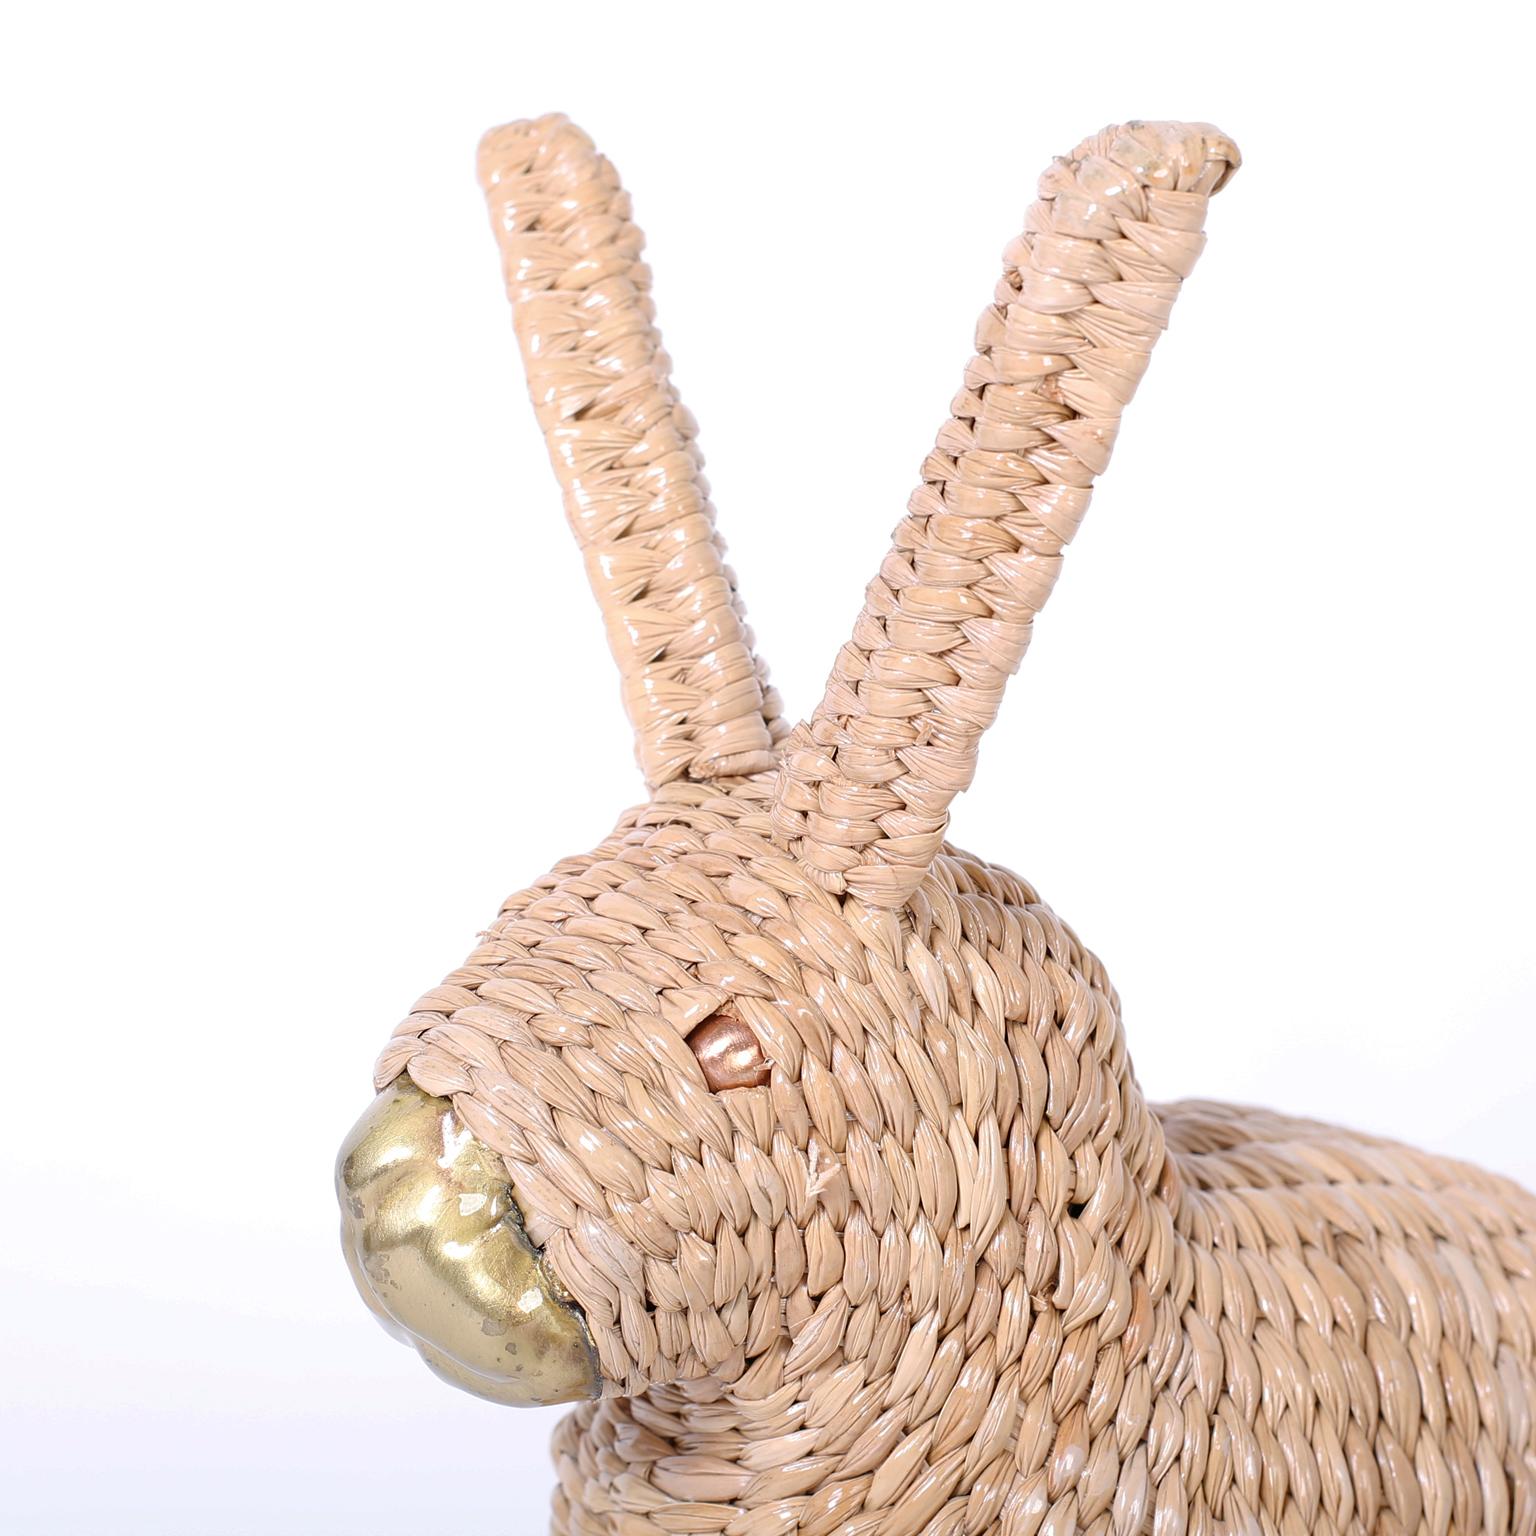 Adorable midcentury bunny or rabbit crafted in wicker, wrapped over a metal frame with a brass nose and copper eyes. Signed Mario Torres 1974 on a medallion.